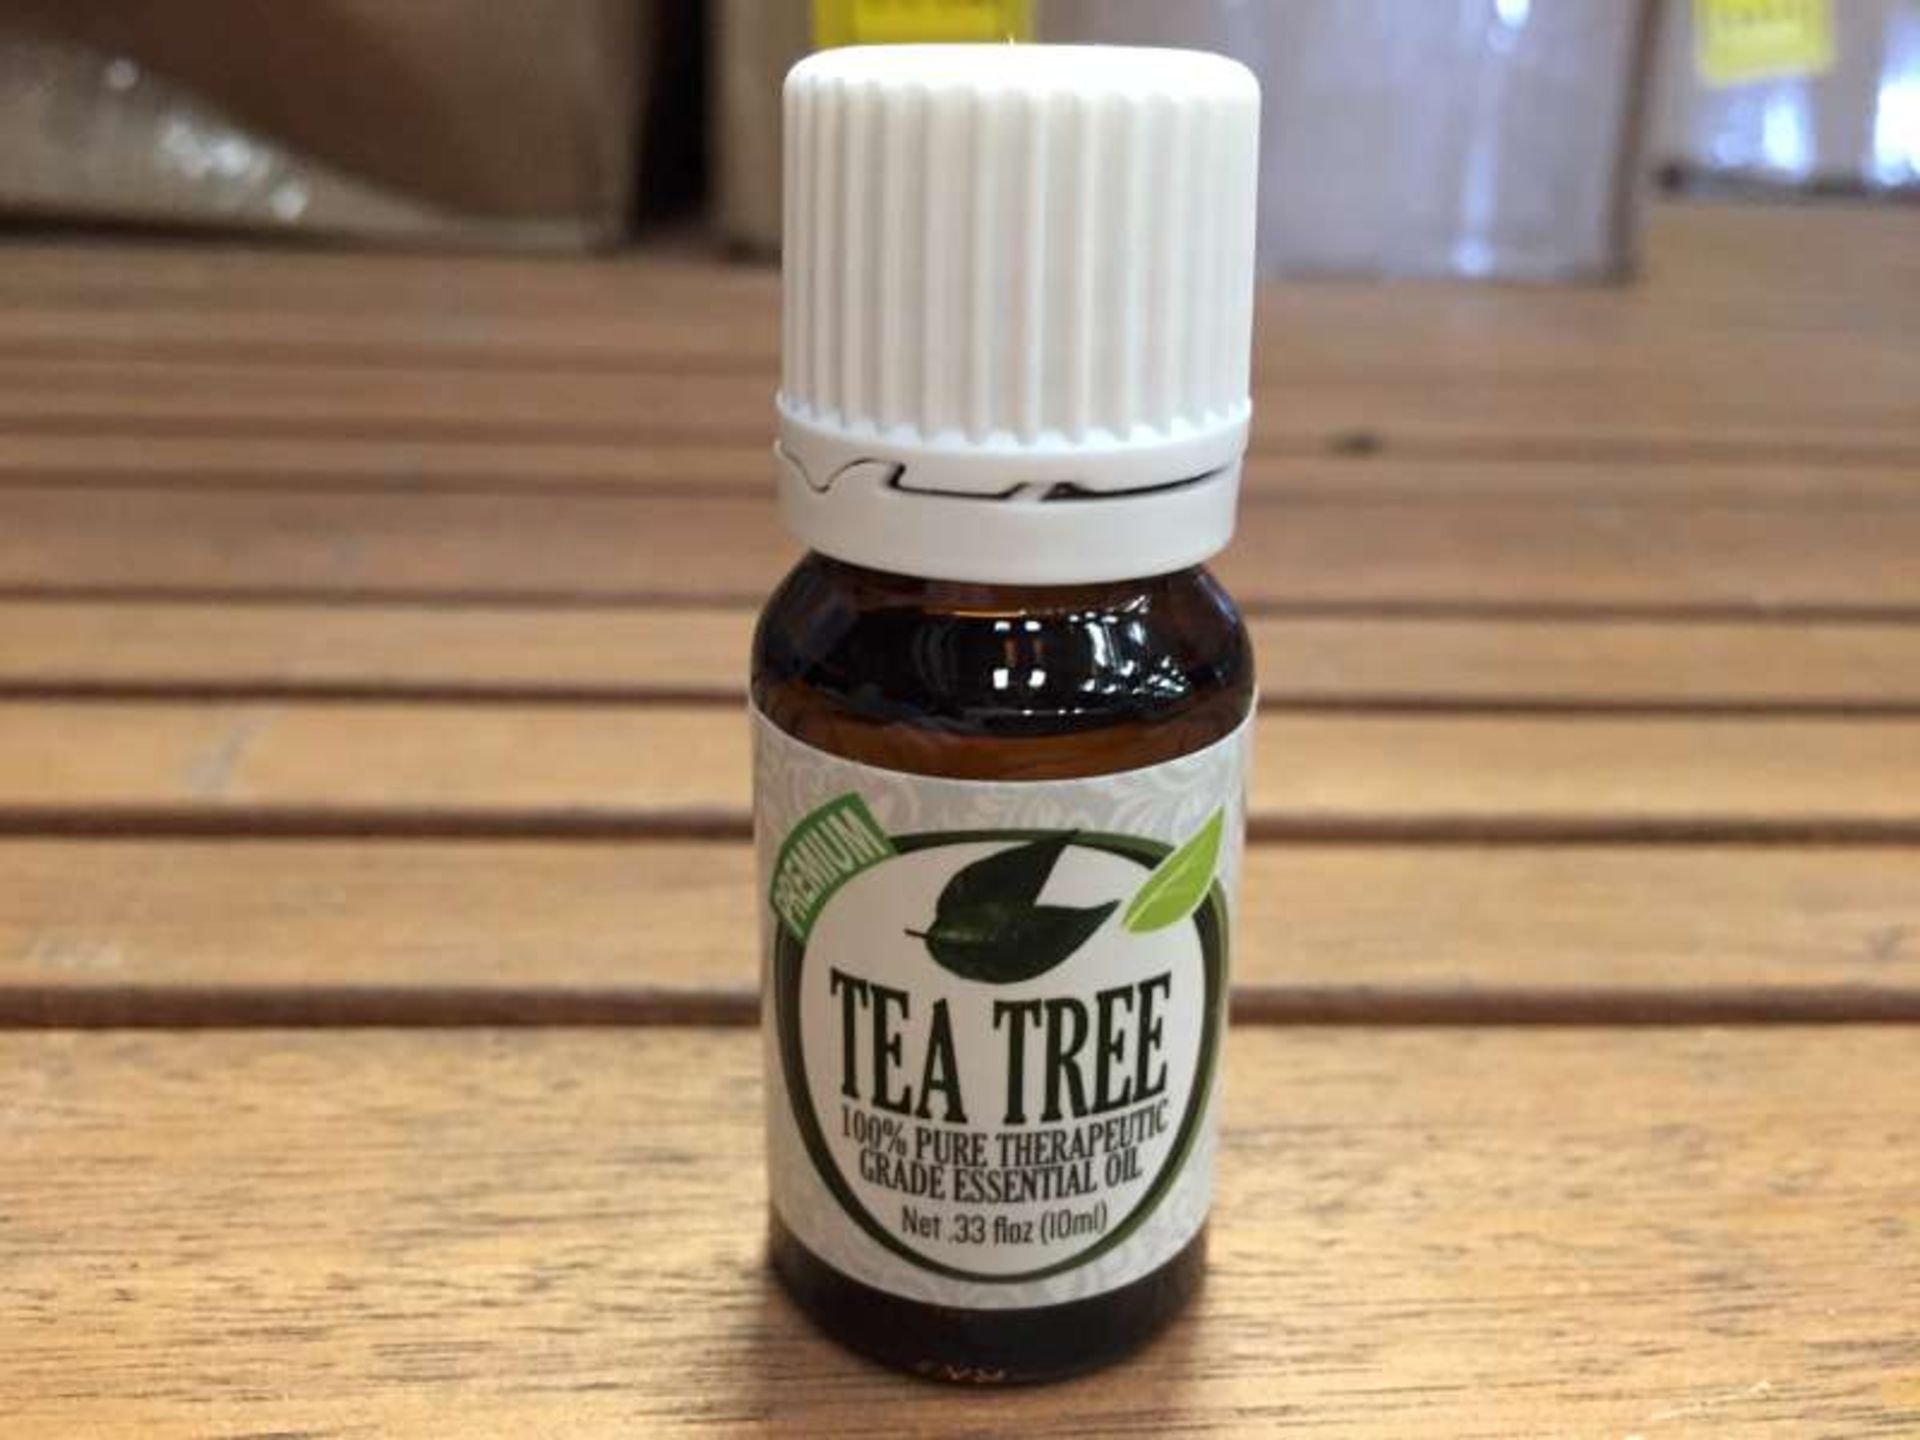 100 X 10 ML BOTTLES OF HEALING SOLUTIONS TEA TREE 100% PURE THERAPEUTIC GRADE ESSENTIAL OIL IN 1